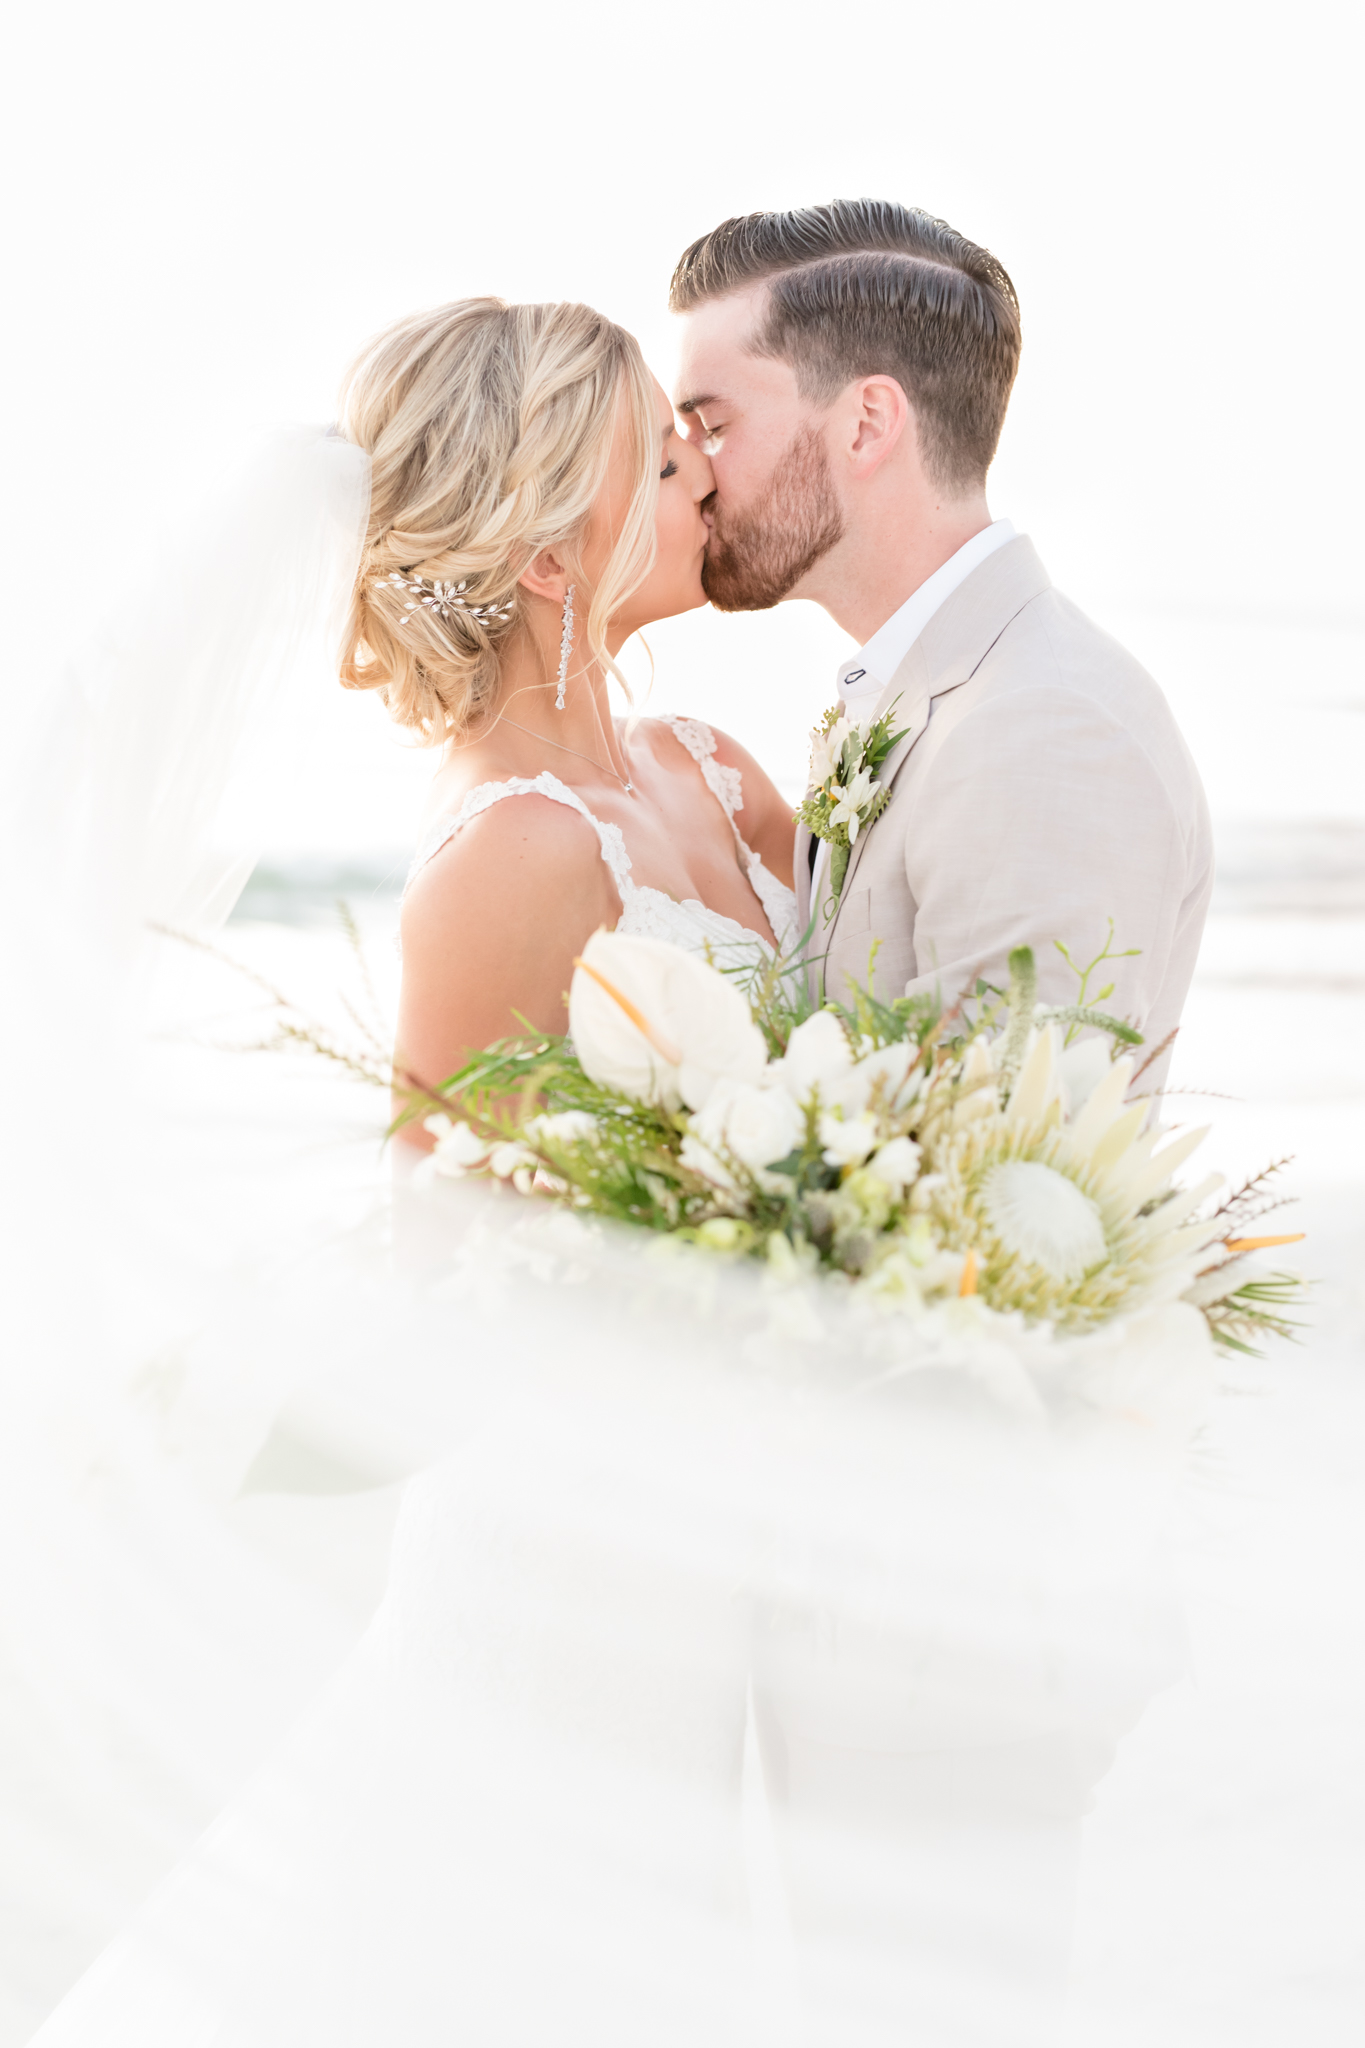 Bride and groom kiss while veil blows in wind.